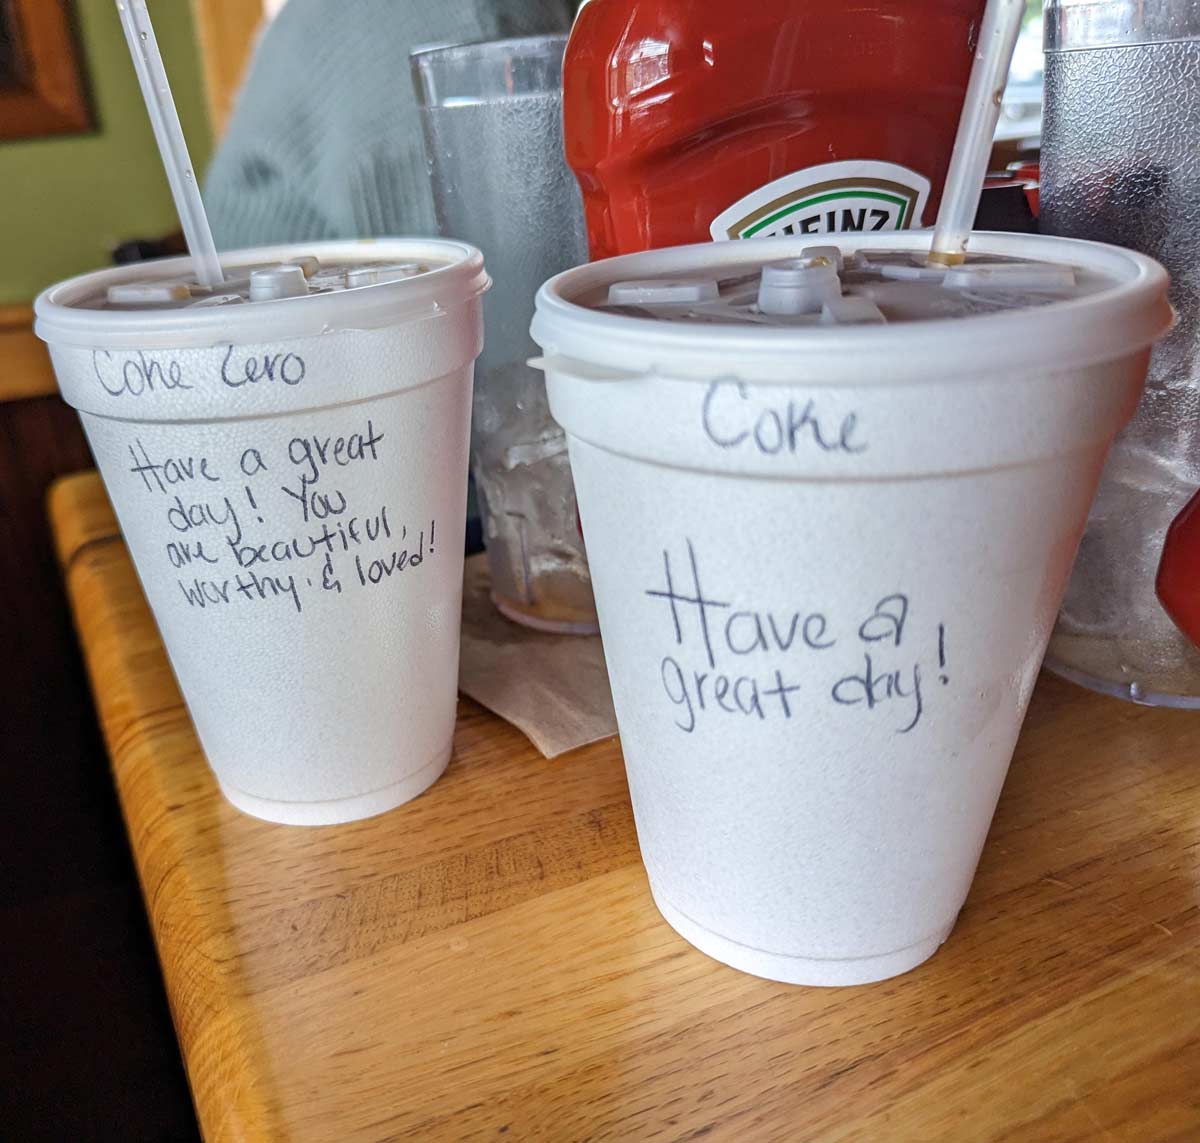 Waitress left kind messages on our drinks. Feel like mine's missing something...